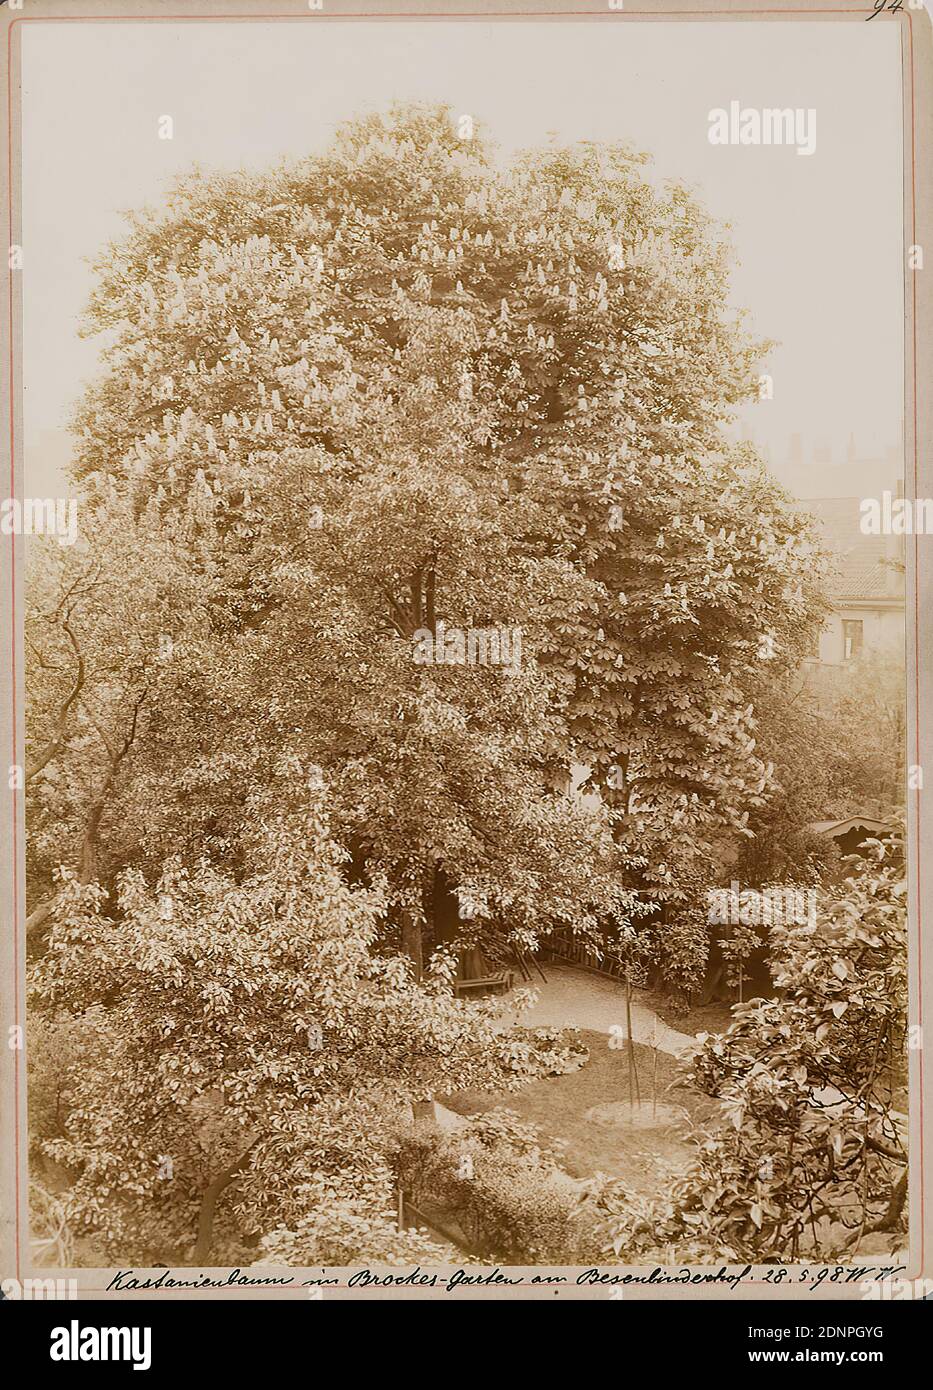 Wilhelm Weimar, chestnut tree in Brockes-Garten at the Besenbinderhof, collodion paper, black and white positive process, image size: height: 17,10 cm; width: 12,10 cm, monogrammed, dated and titled: recto below: with ink: chestnut tree in Brockes-Garten at the Besenbinderhof 18.5.98.W.W, with pencil: Weimar, Wilhelm, landscape photography, nature photography, plants, vegetation, garden, trees, shrubs, St. Georg Stock Photo